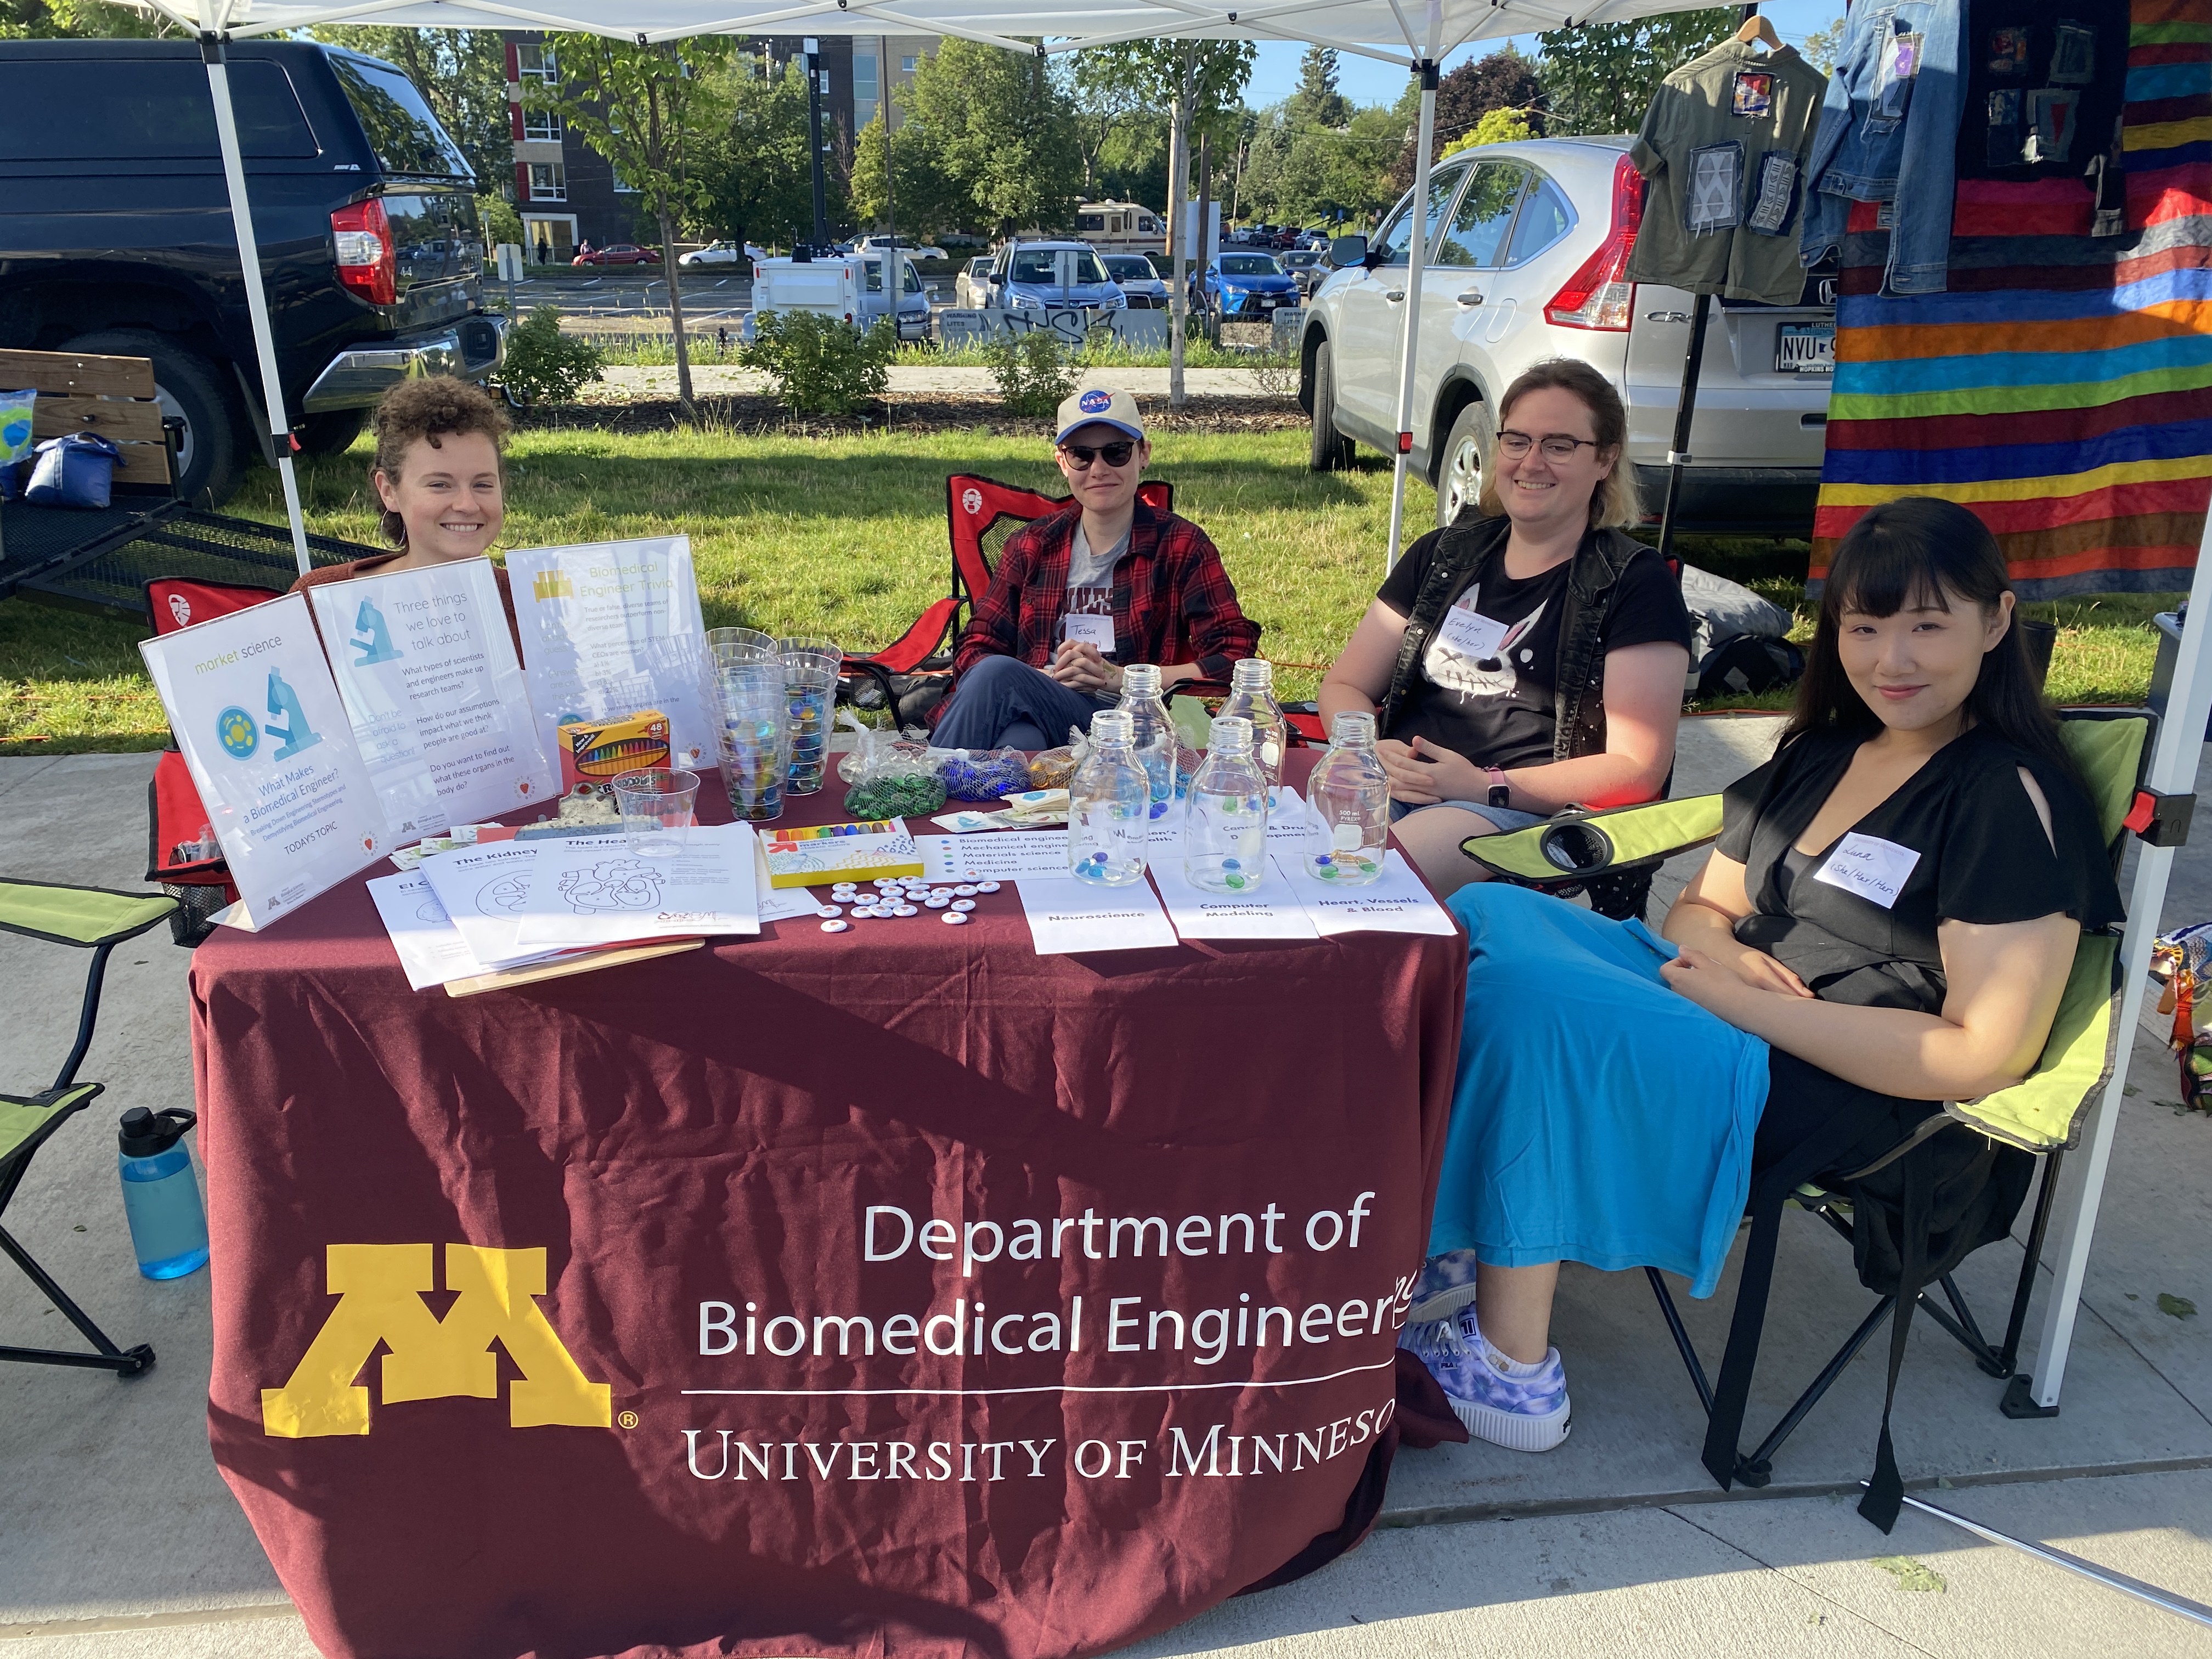 A group of women at a farmer's market booth about biomedical engineering